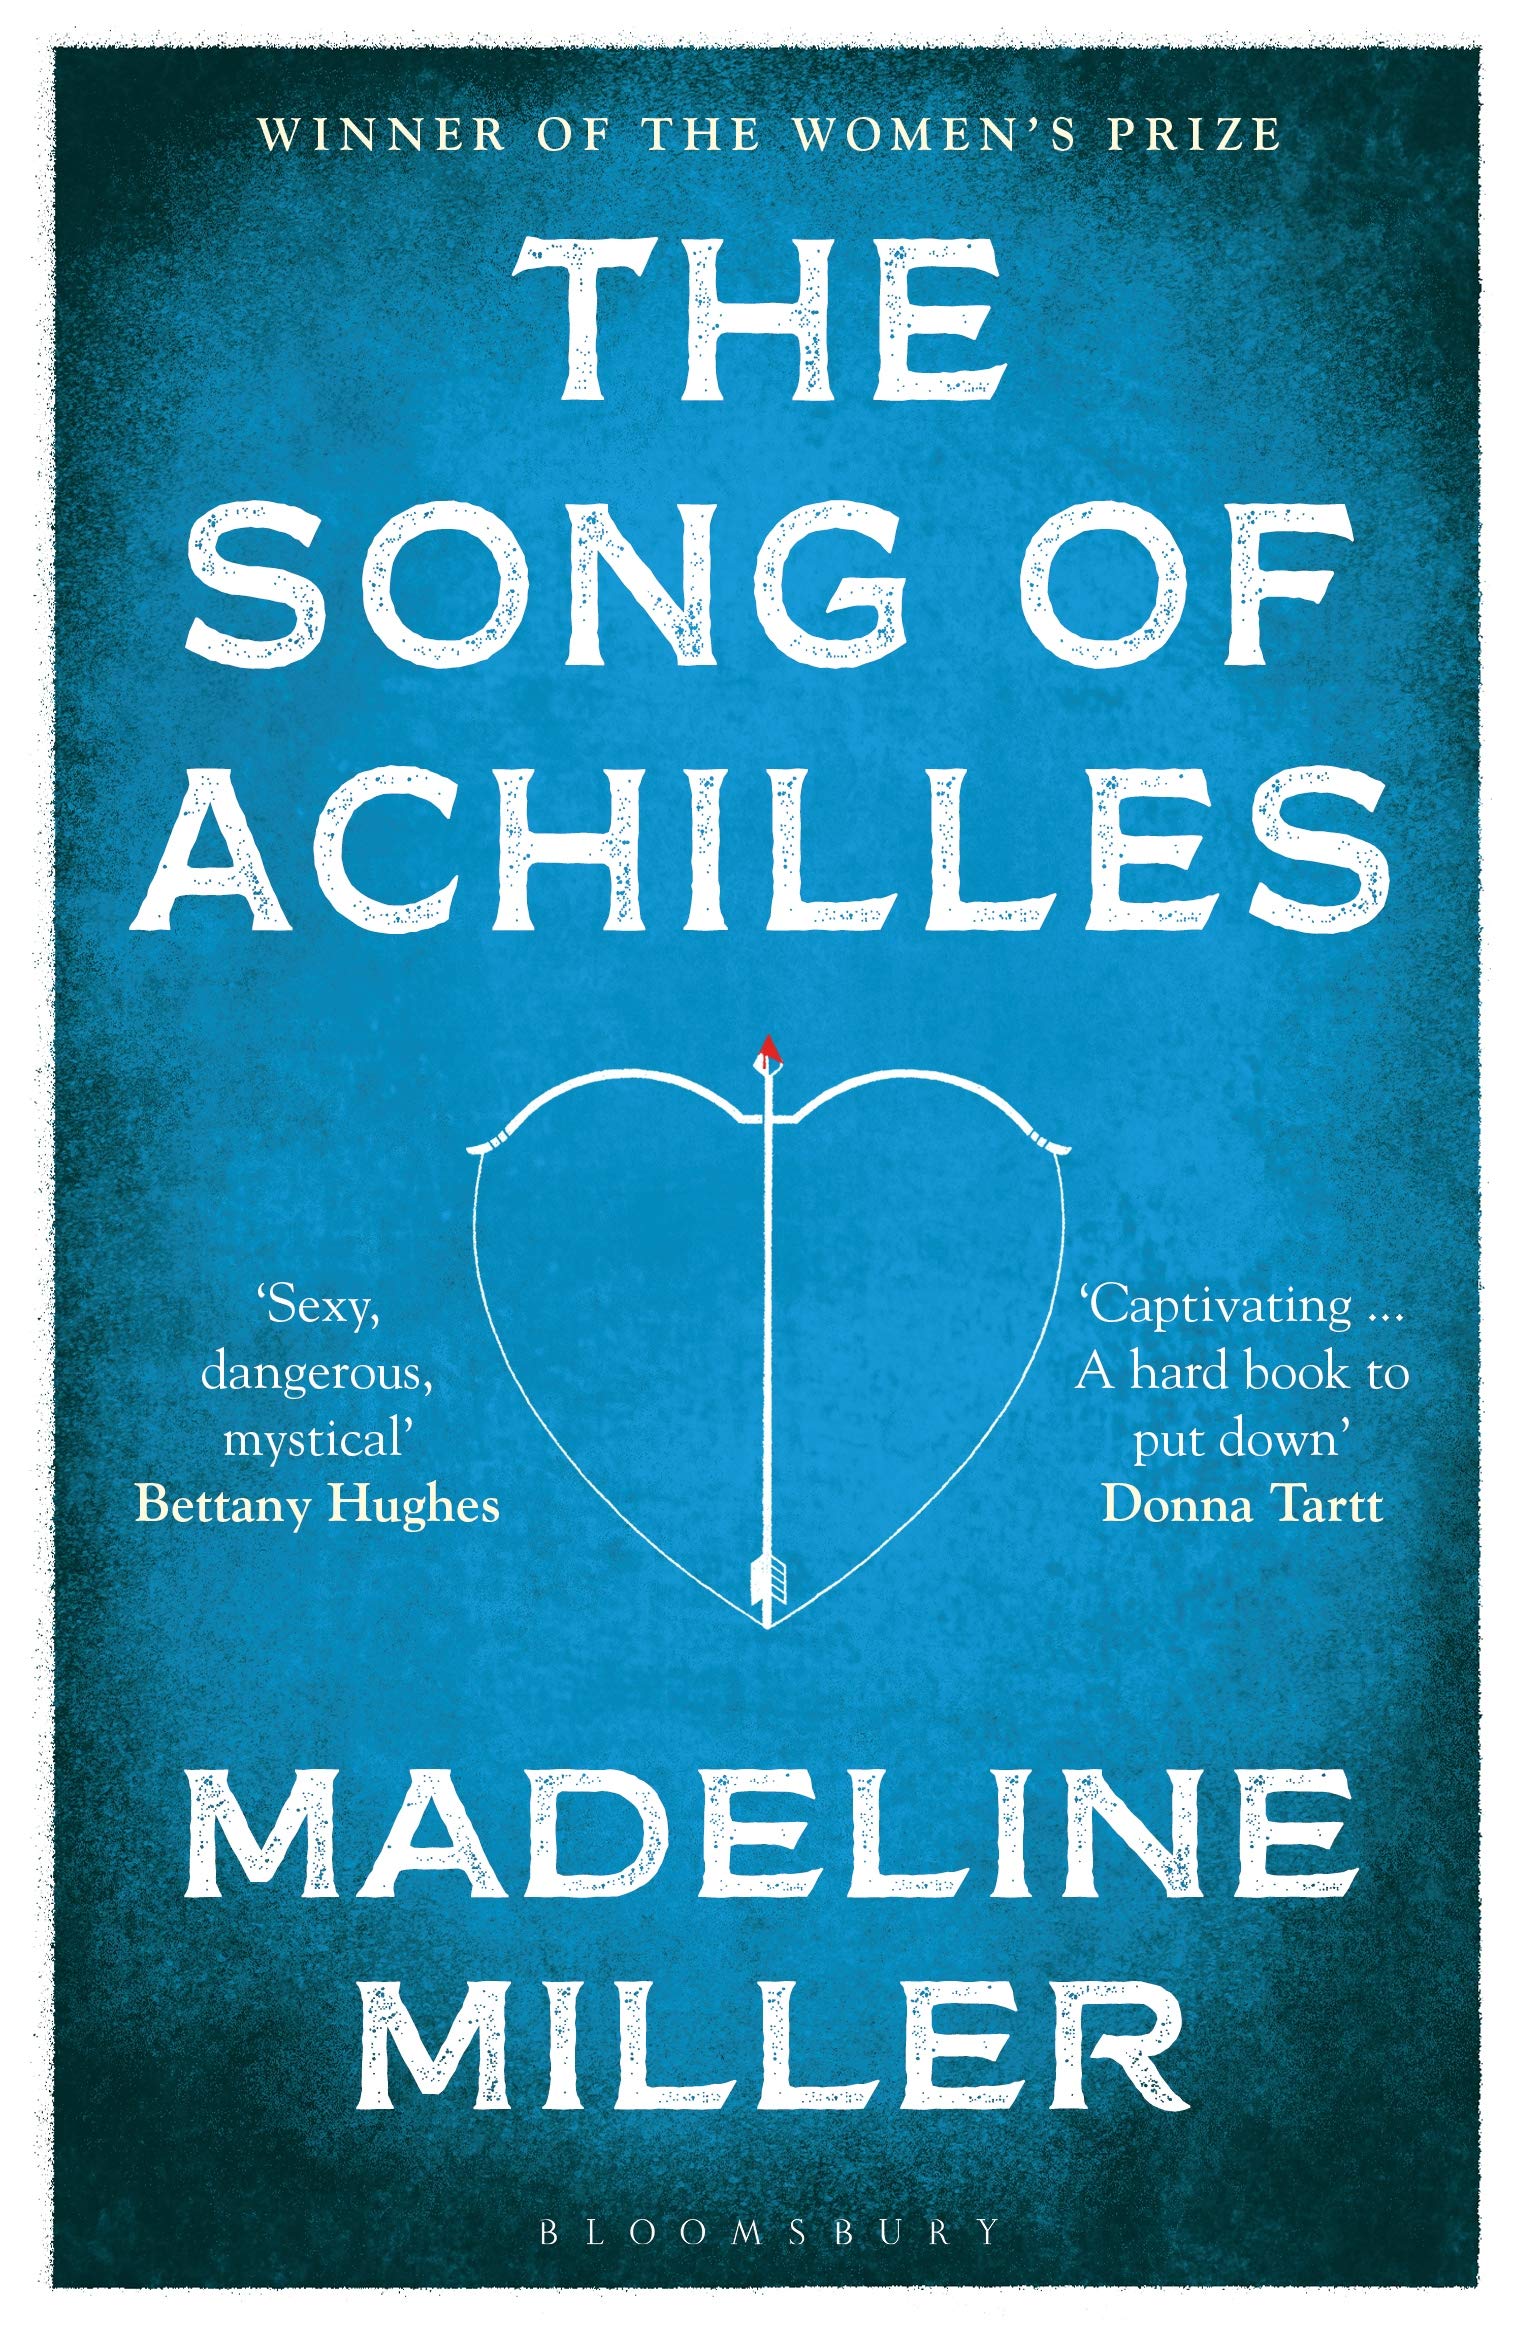 The Songs of Achilles